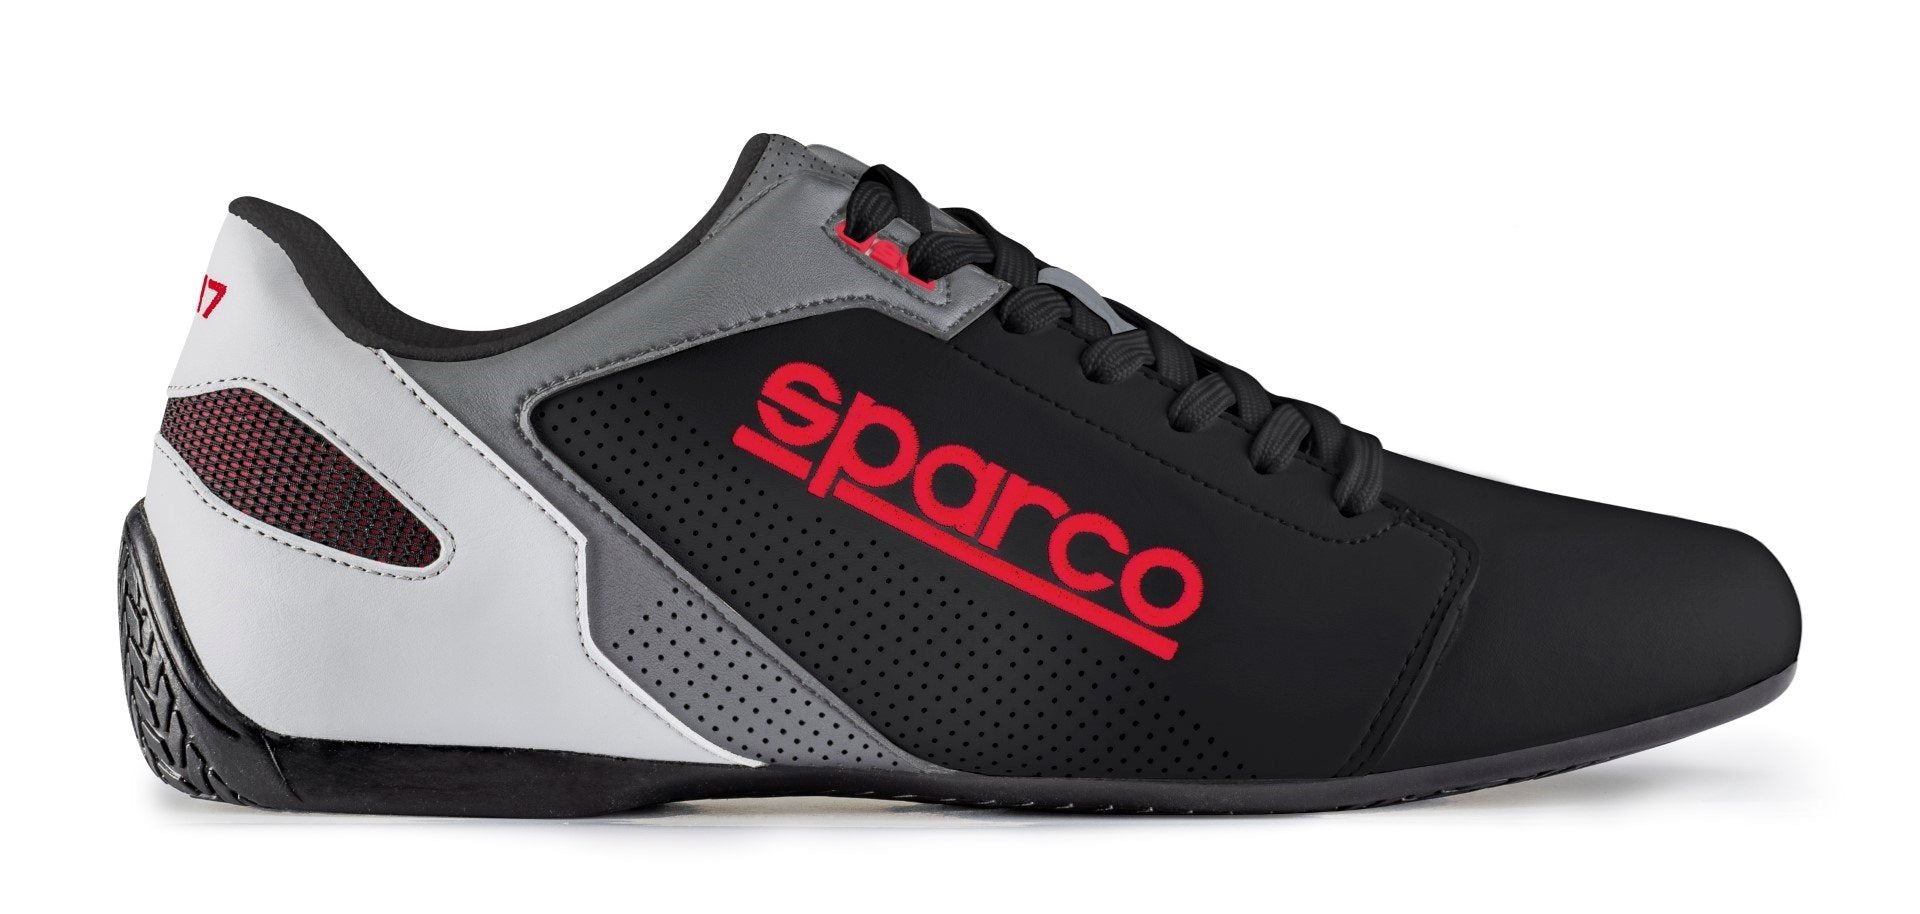 Sparco SL17 46 Black and Red Shoes